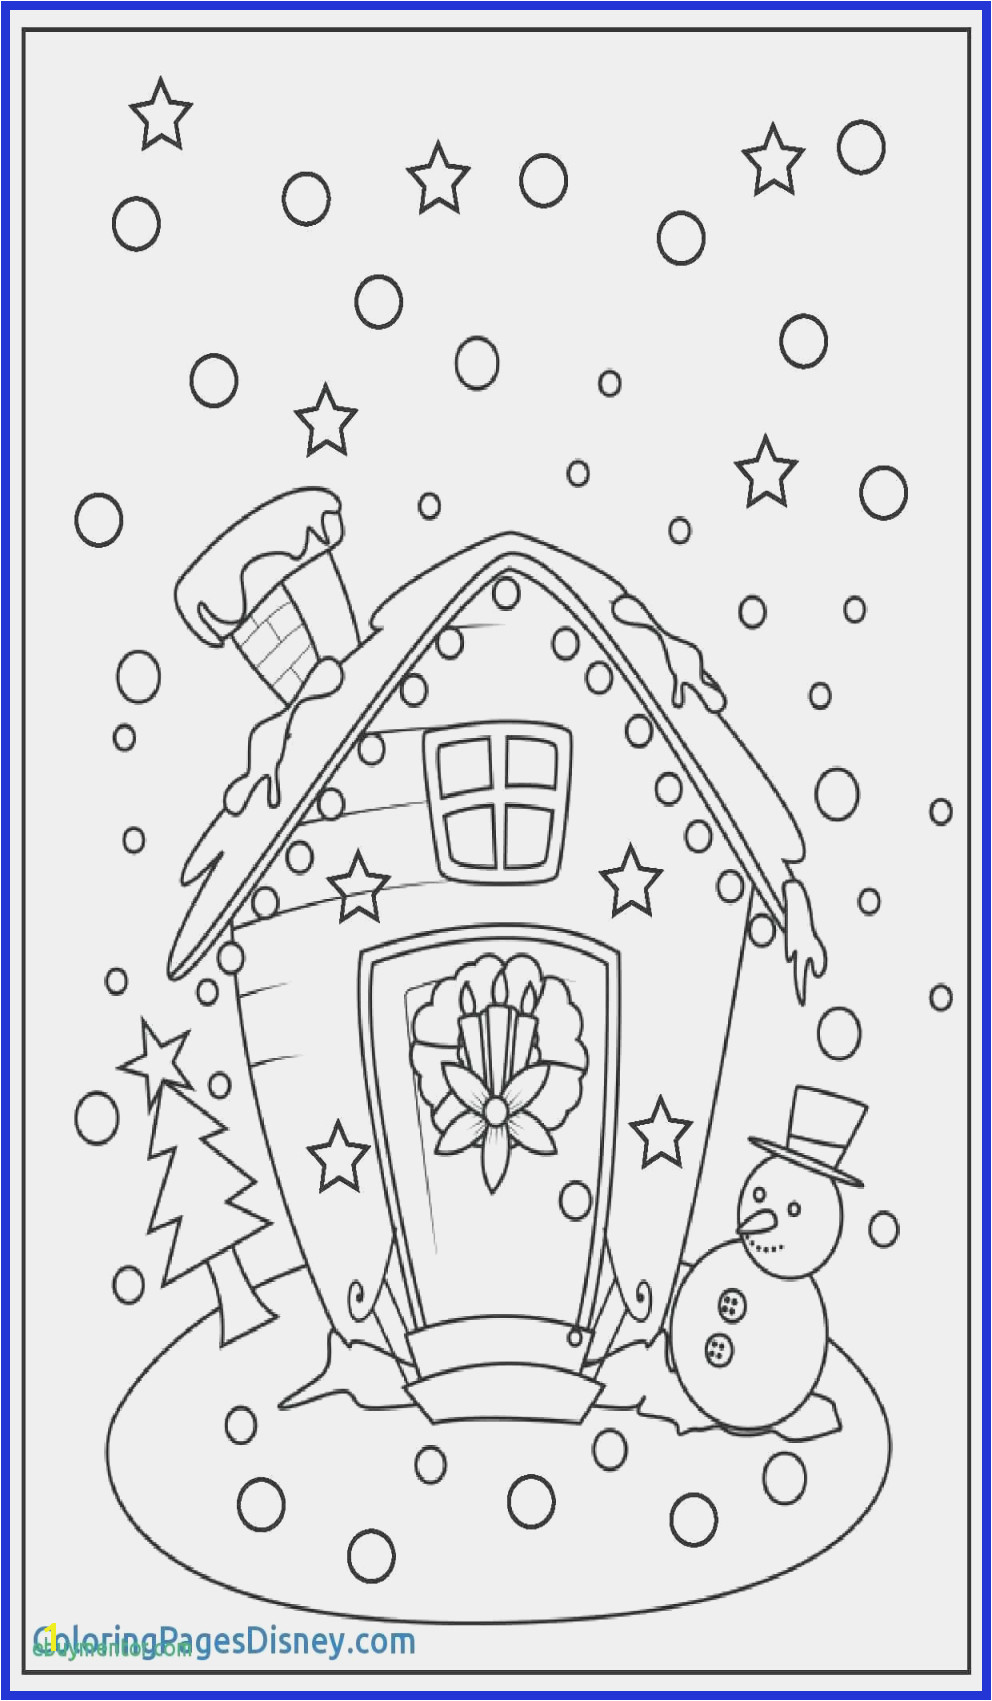 Free Easy to Print Coloring Pages for Adults Easy Mandala Coloring Pages Free Printable Coloring Christmas Pages